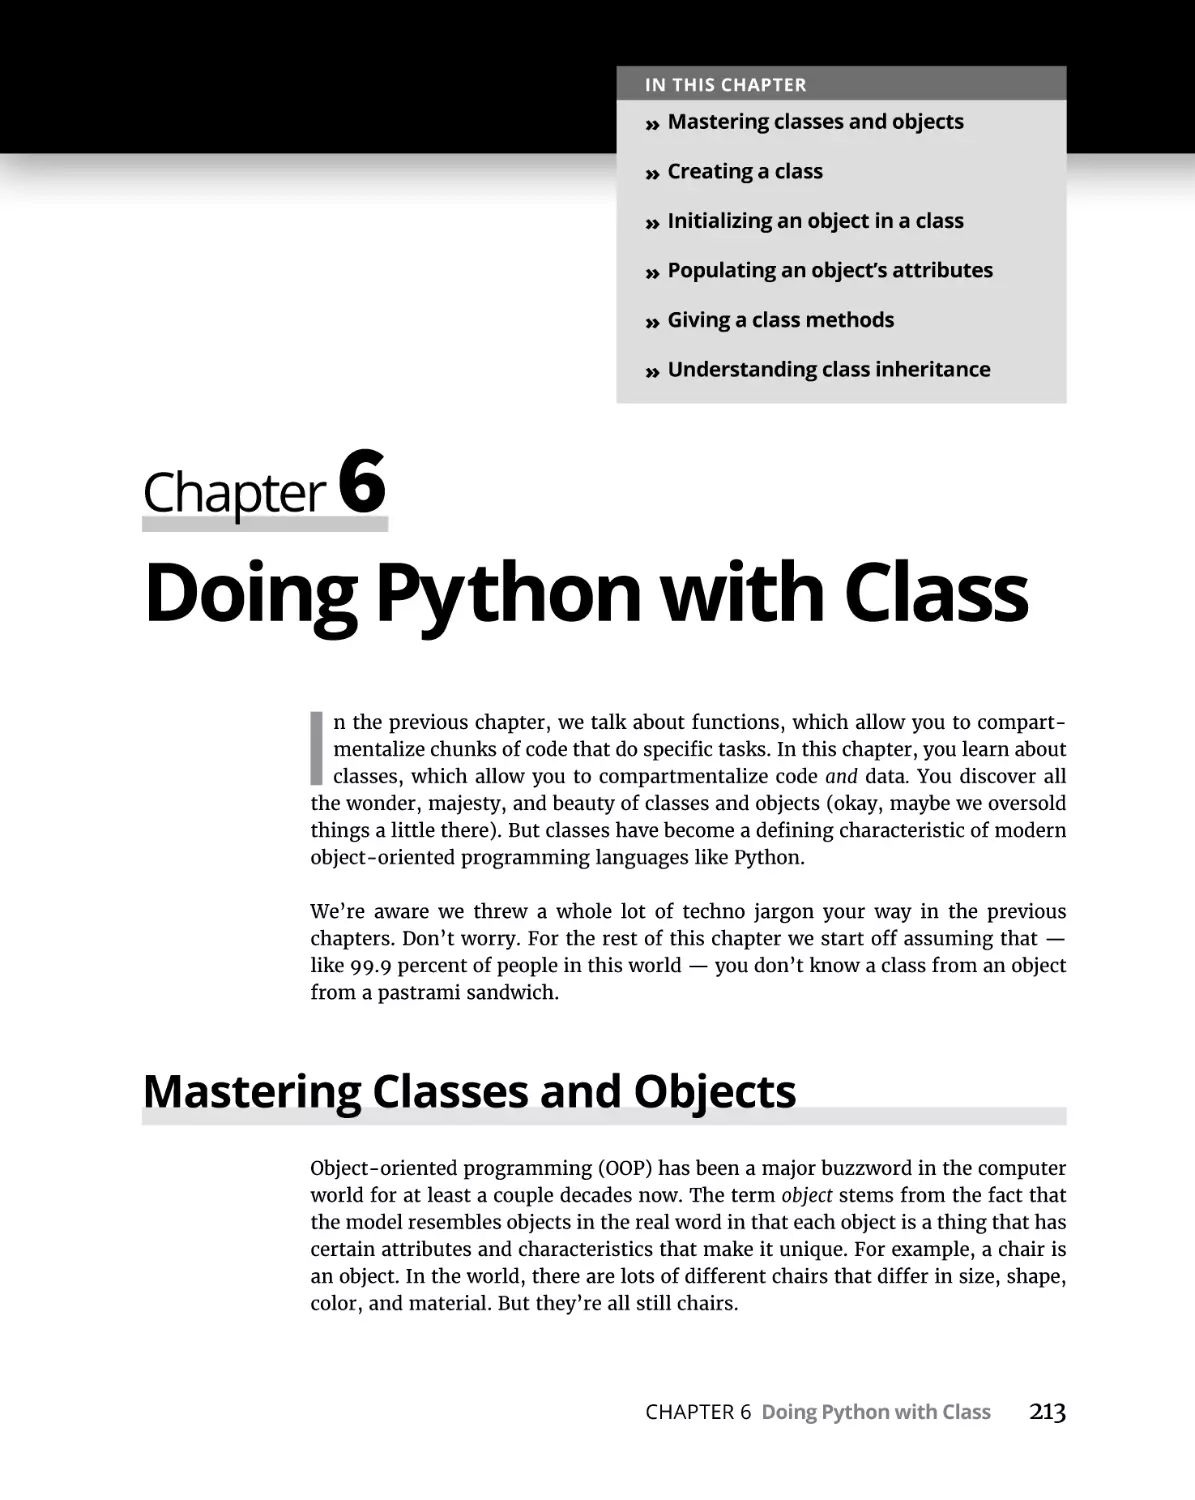 Chapter 6 Doing Python with Class
Mastering Classes and Objects